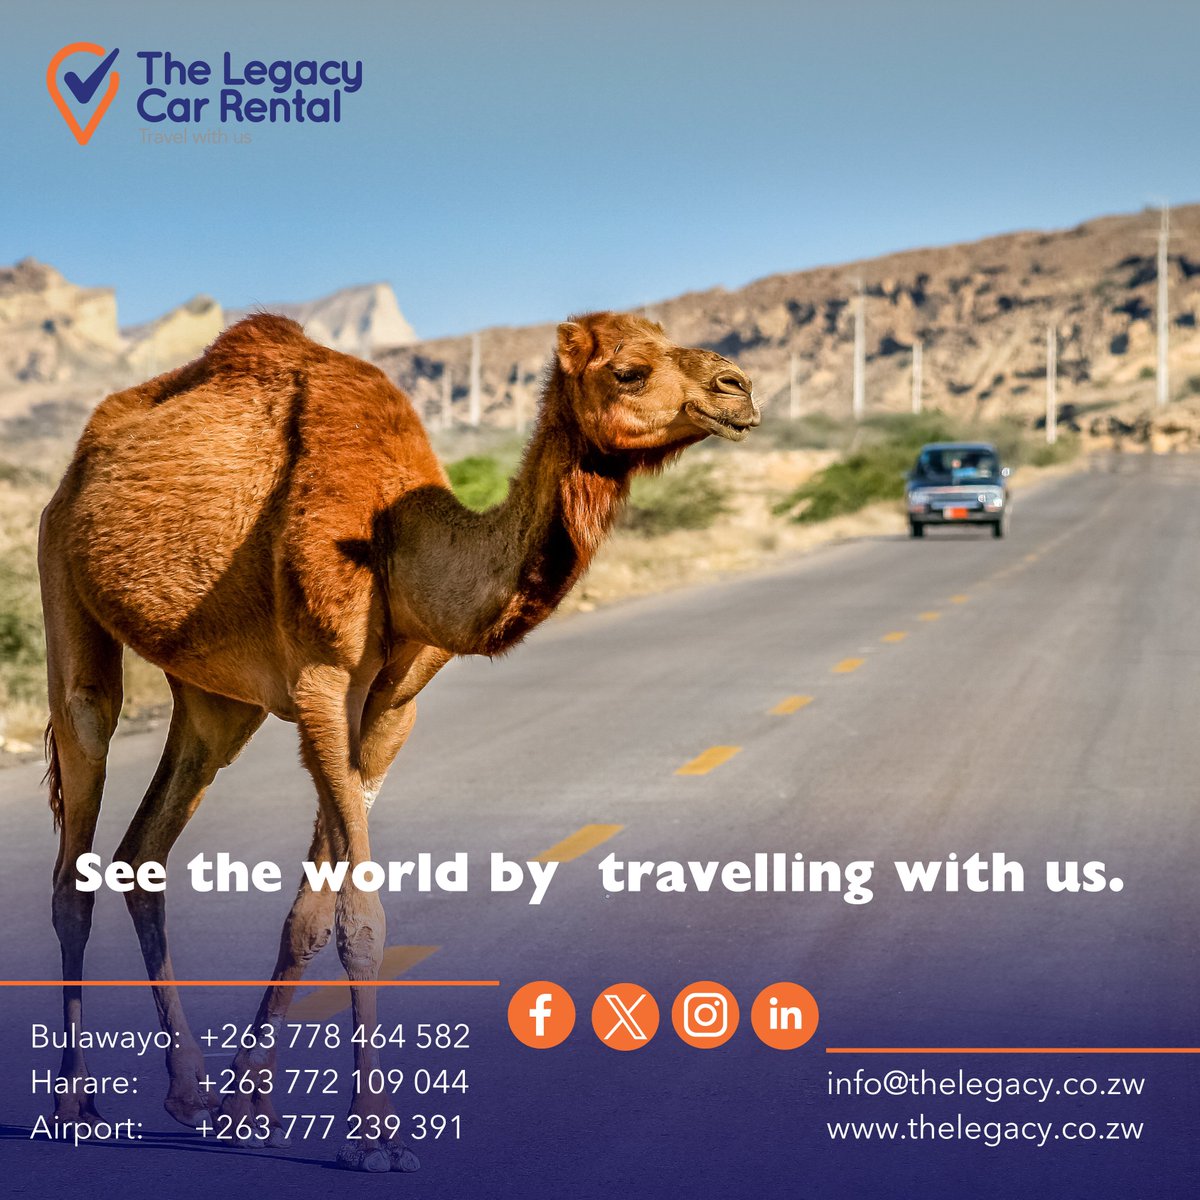 Book your next adventure with us and embark on the journey of a lifetime. #adventuretravel #travelwithus #TheLegacy #CarRental